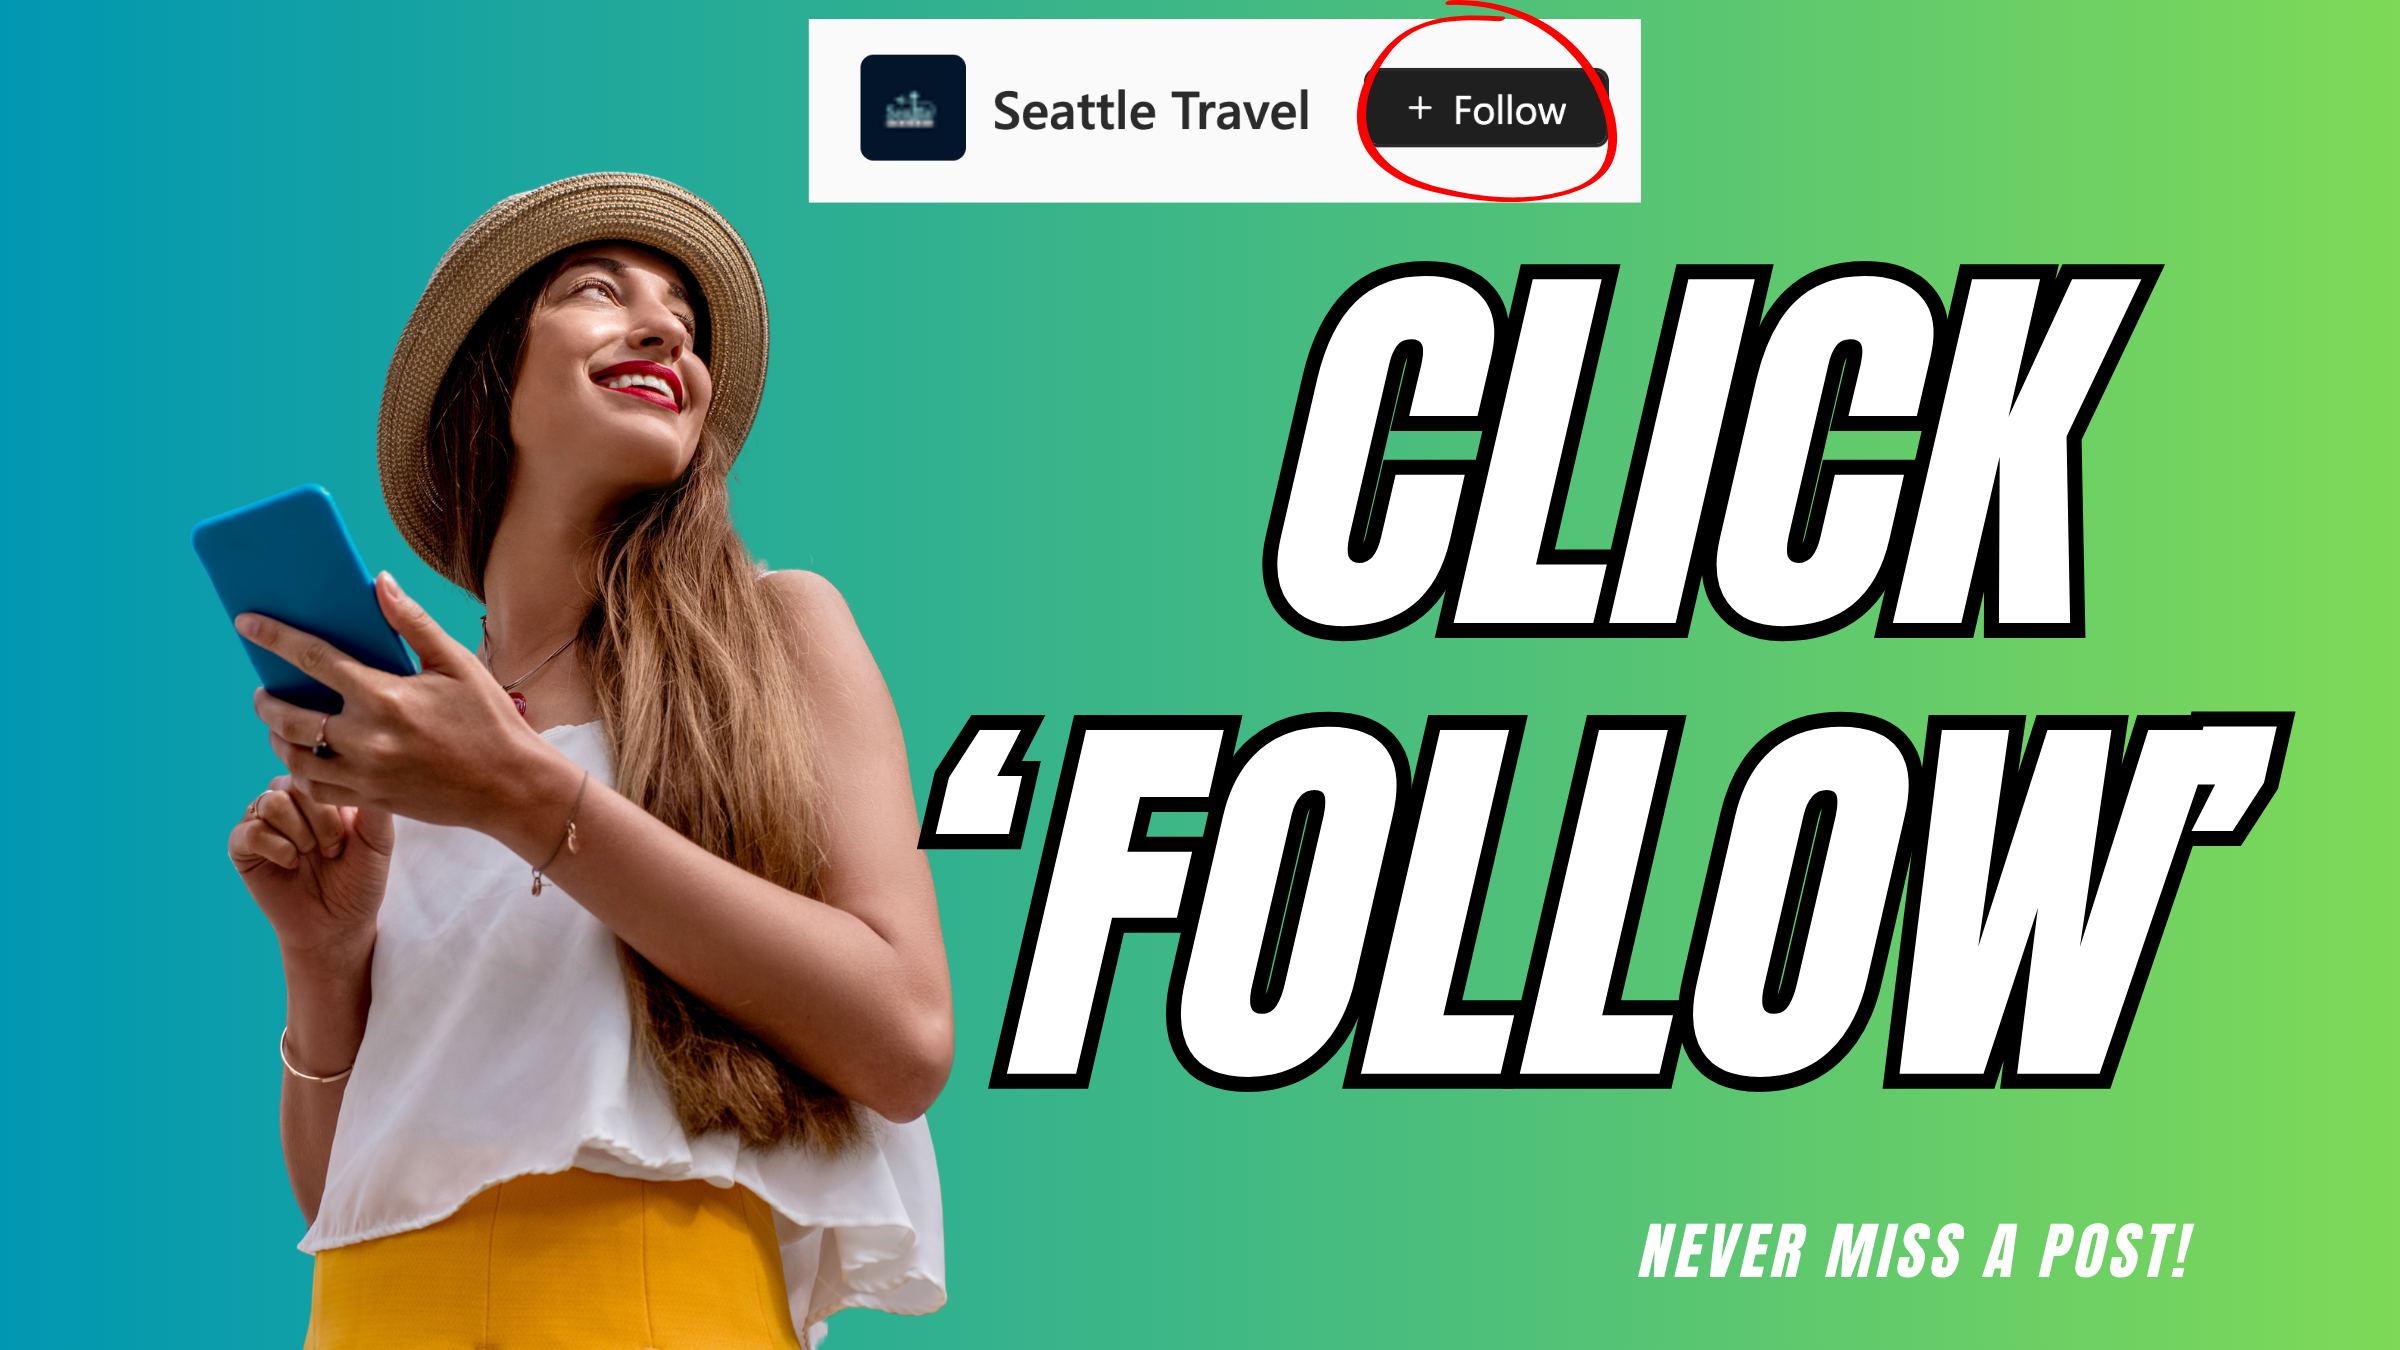 <p>Remember to scroll up and hit the ‘Follow’ button to keep up with the newest stories from Seattle Travel on your Microsoft Start feed or MSN homepage!</p>